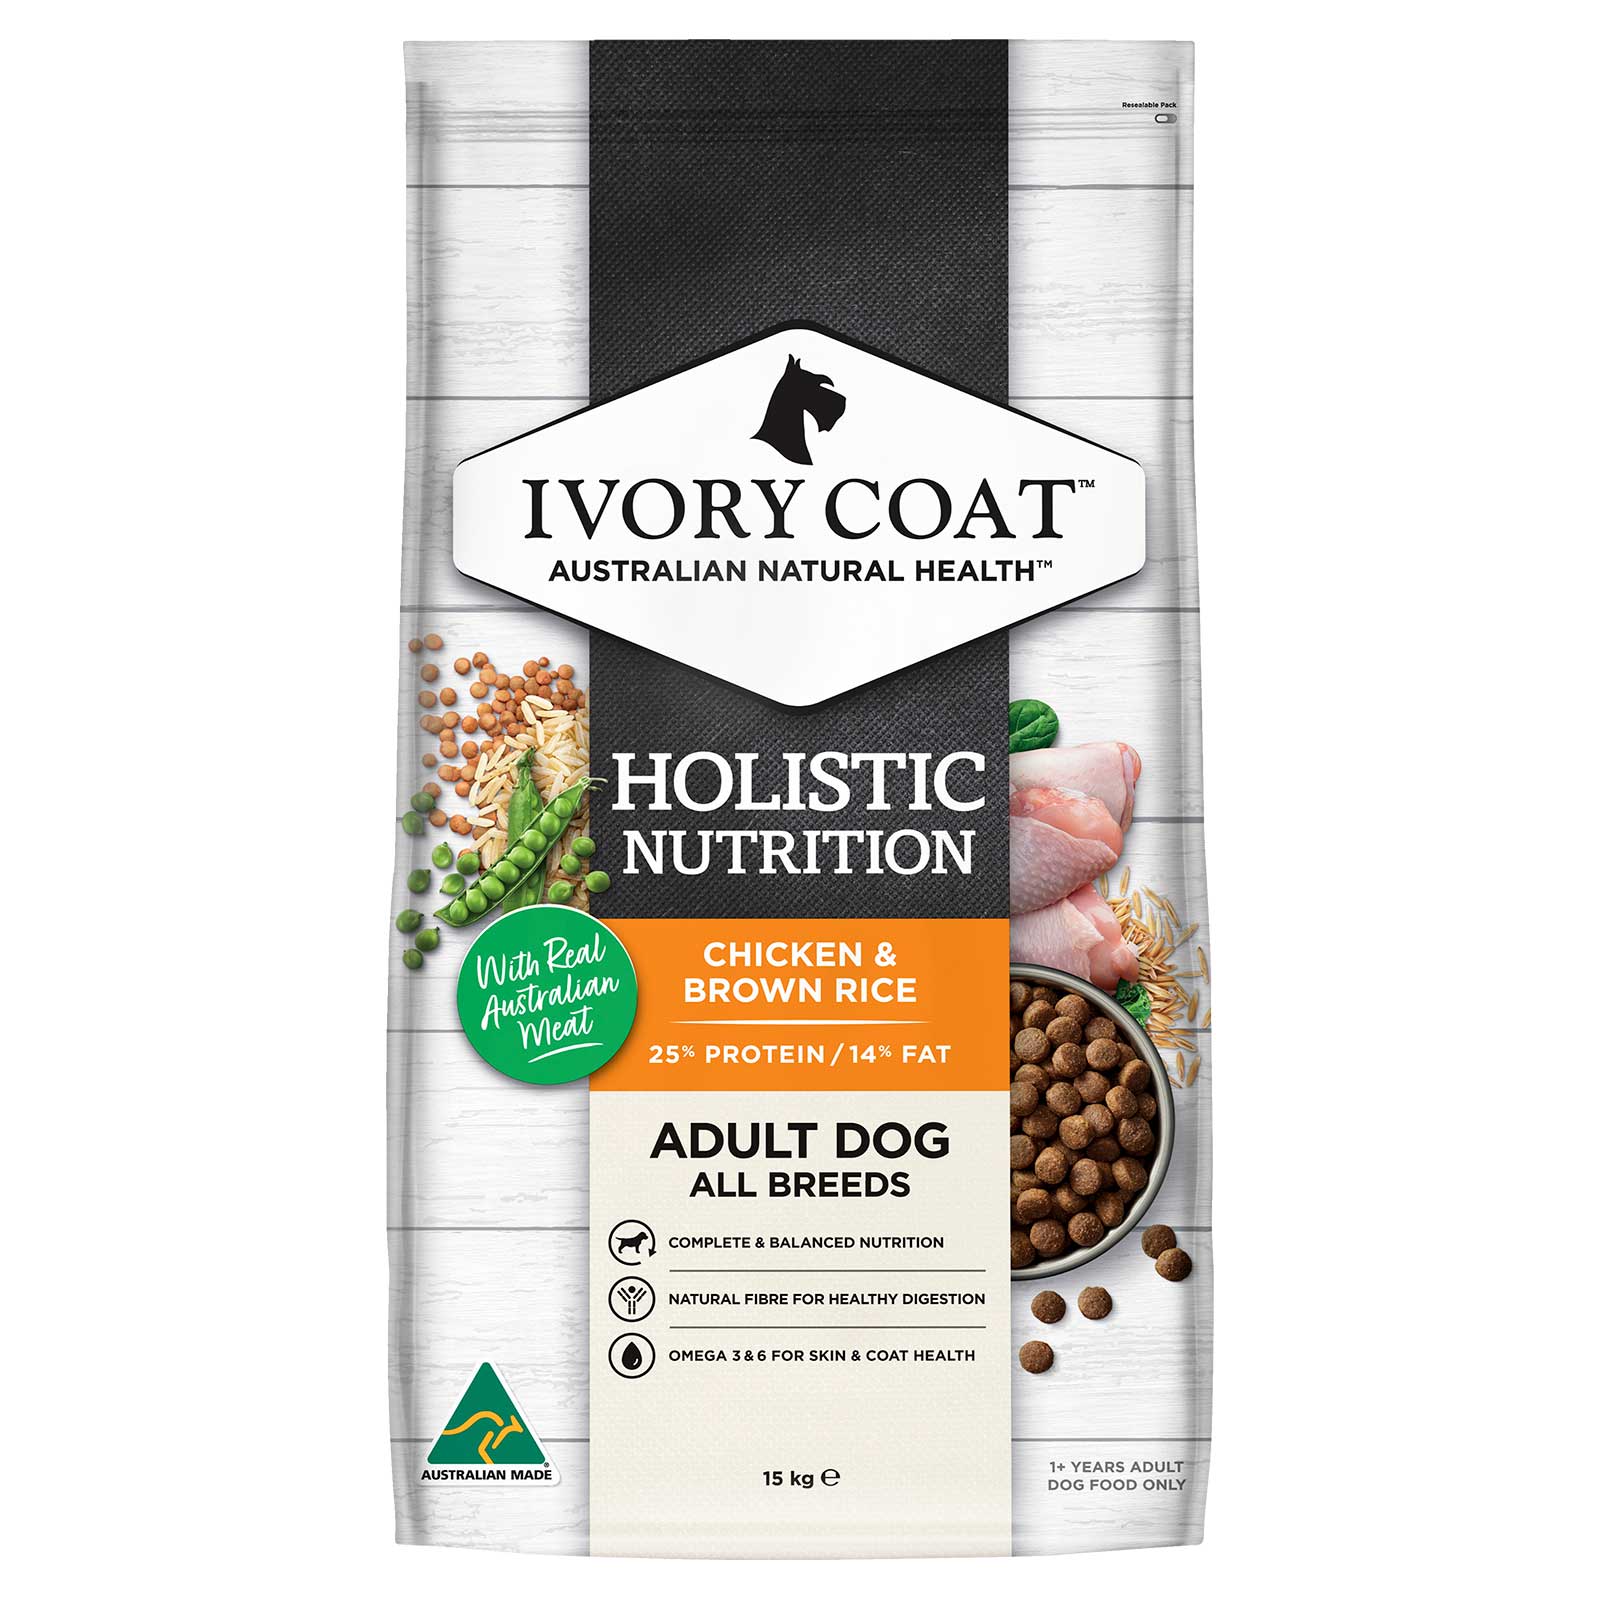 Ivory Coat Dog Food Adult Chicken & Brown Rice